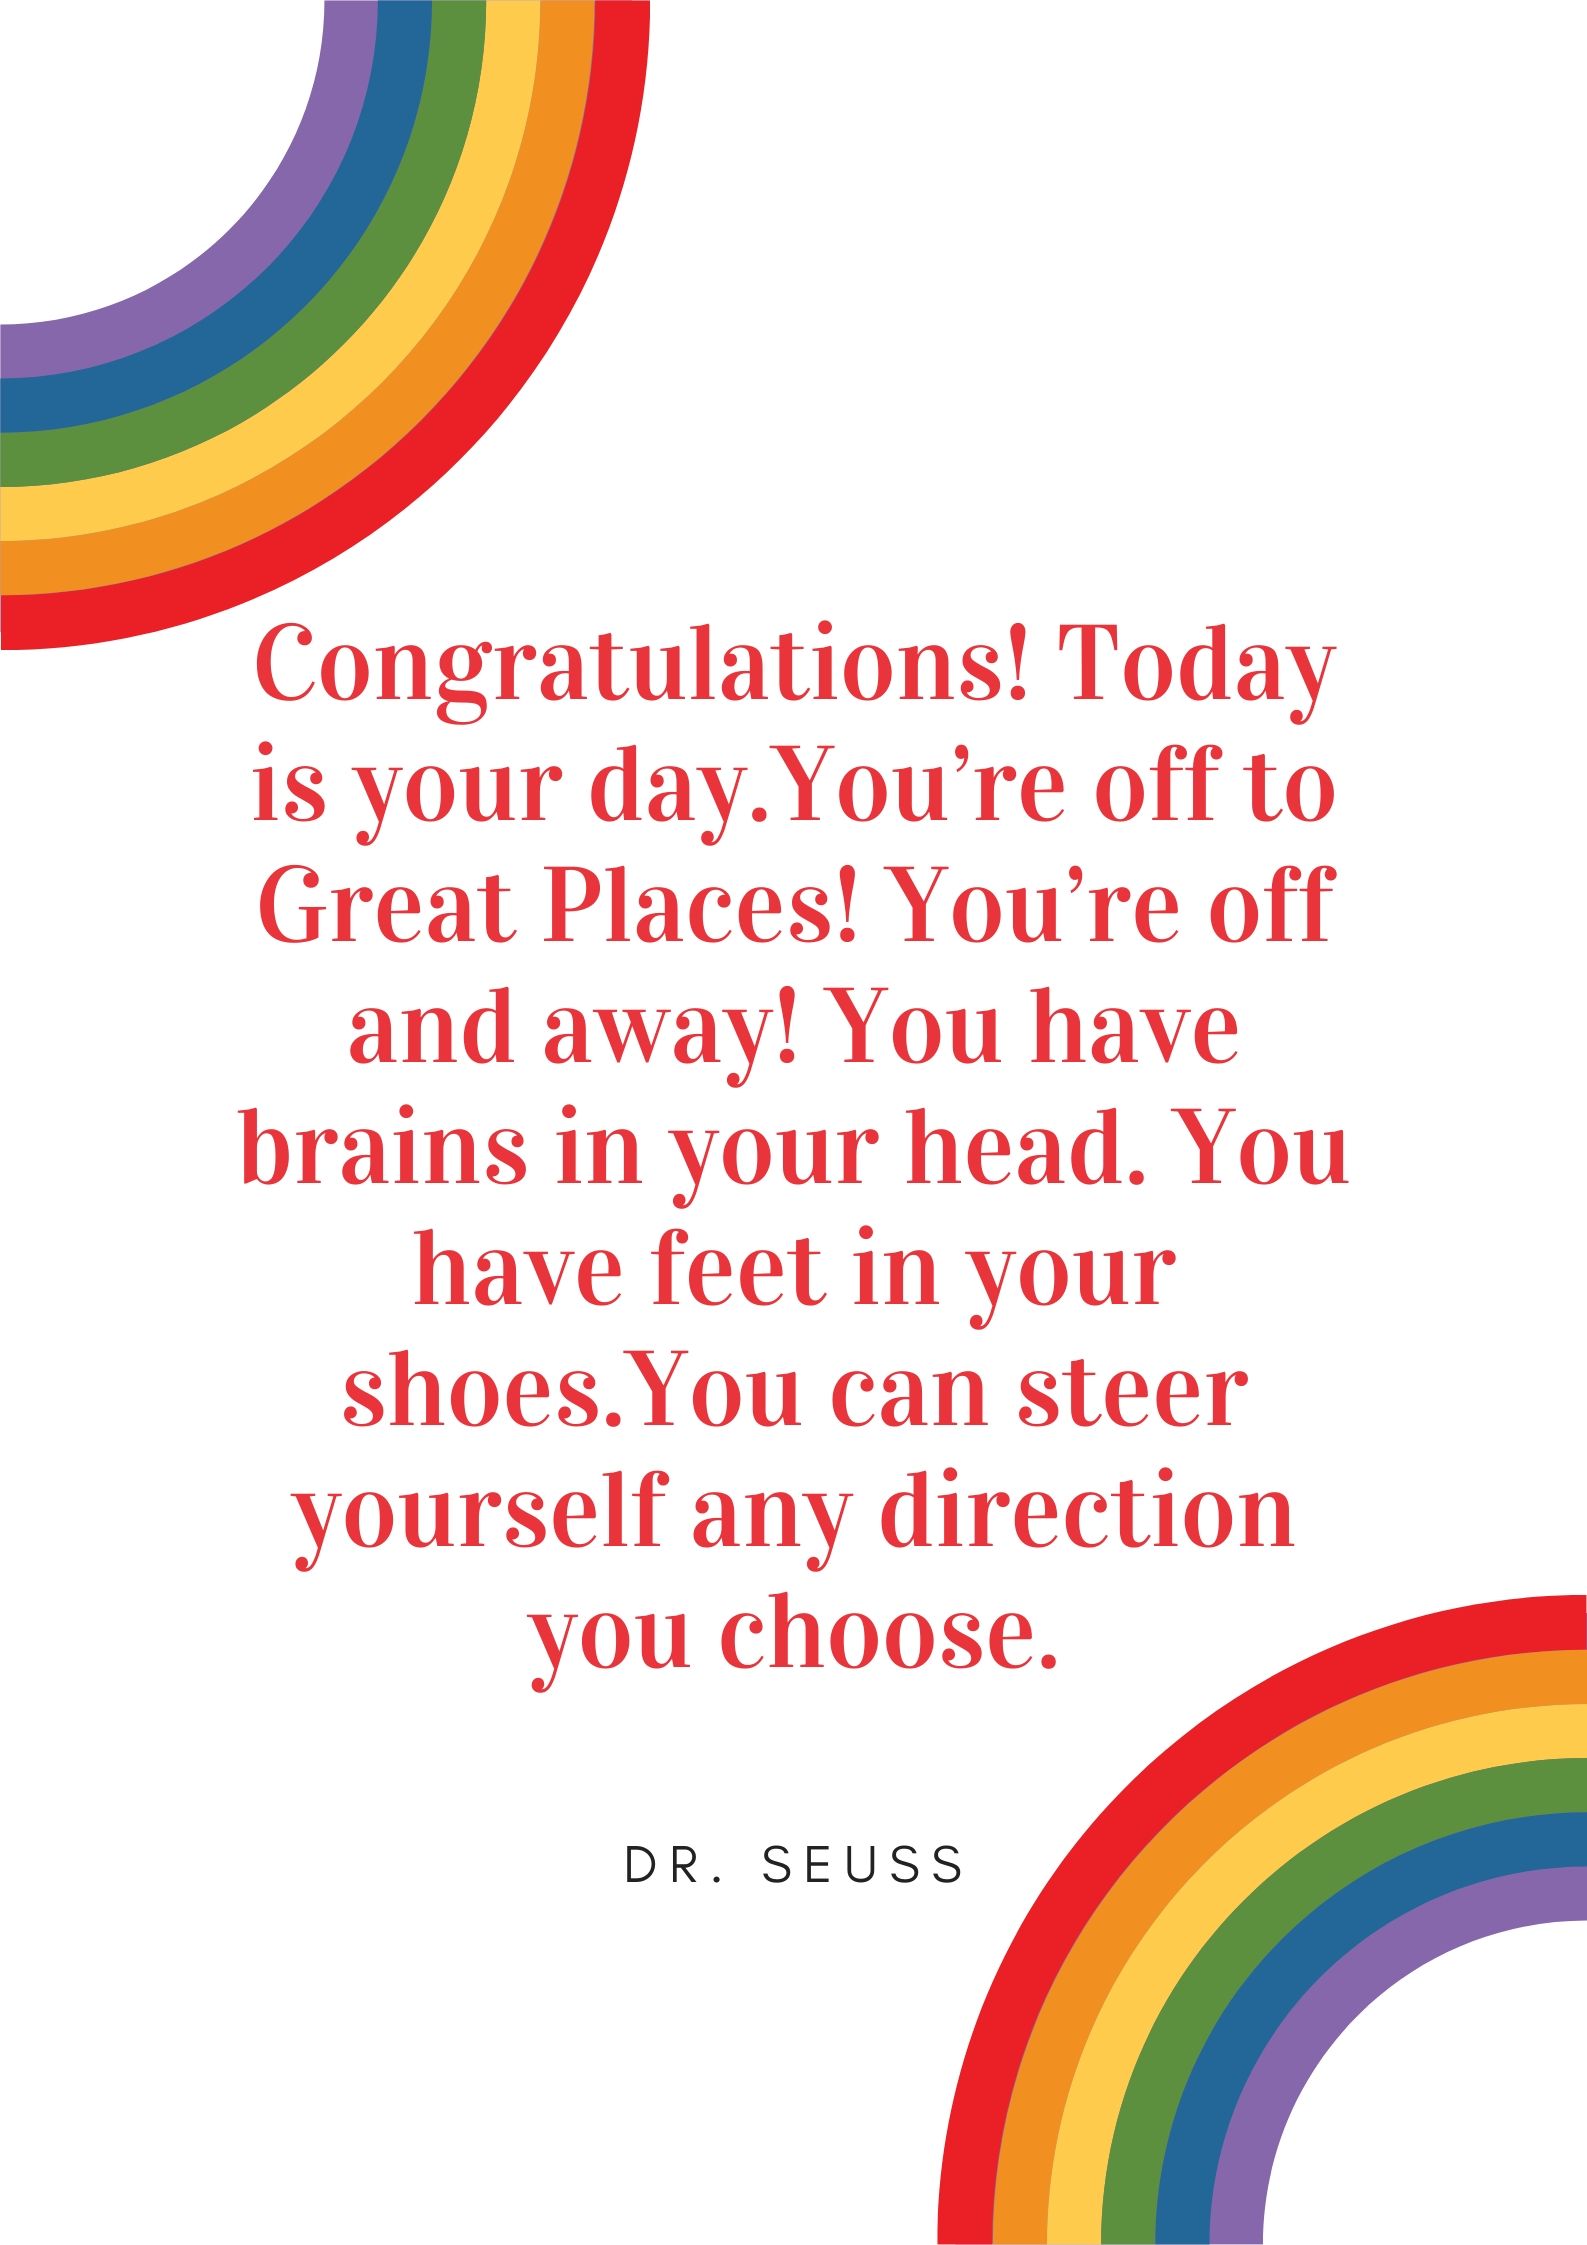 Congratulations! Today is your day.You’re off to Great Places! You’re off and away! You have brains in your head. You have feet in your shoes.You can steer yourself any direction you choose.